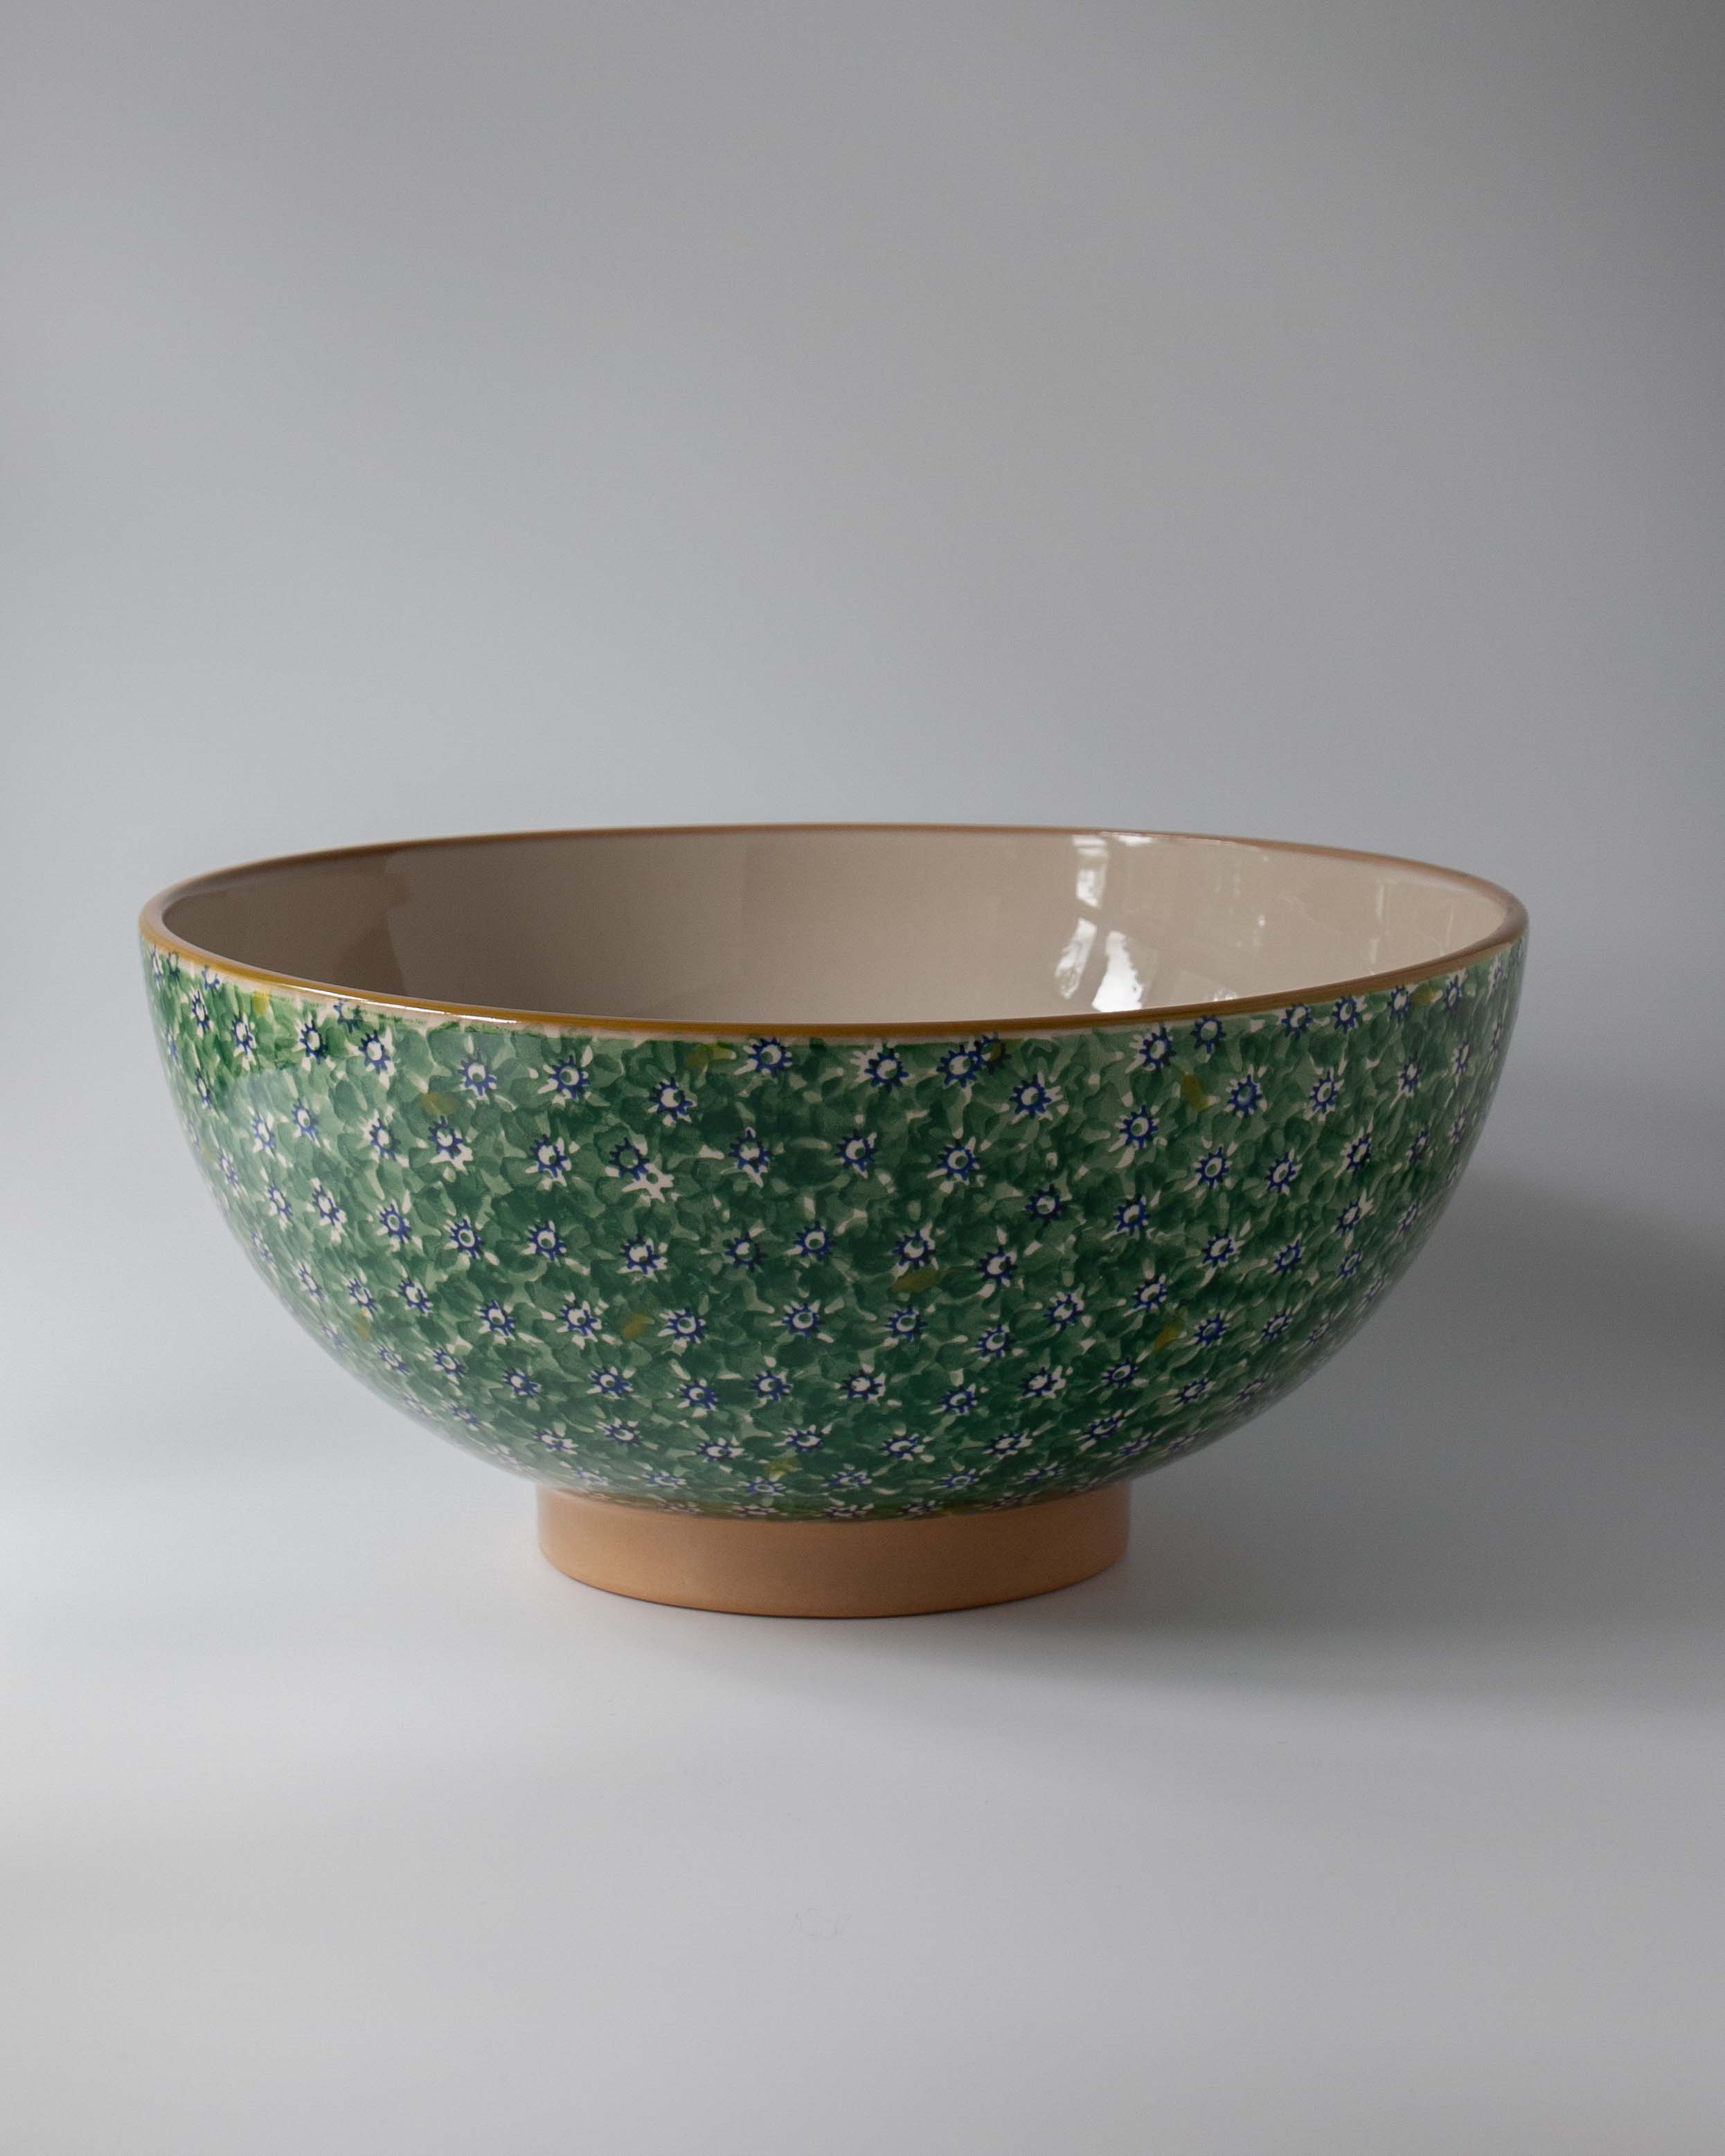 Kenmare Large Green Ceramic Handmade Bowl | Anboise Accessories